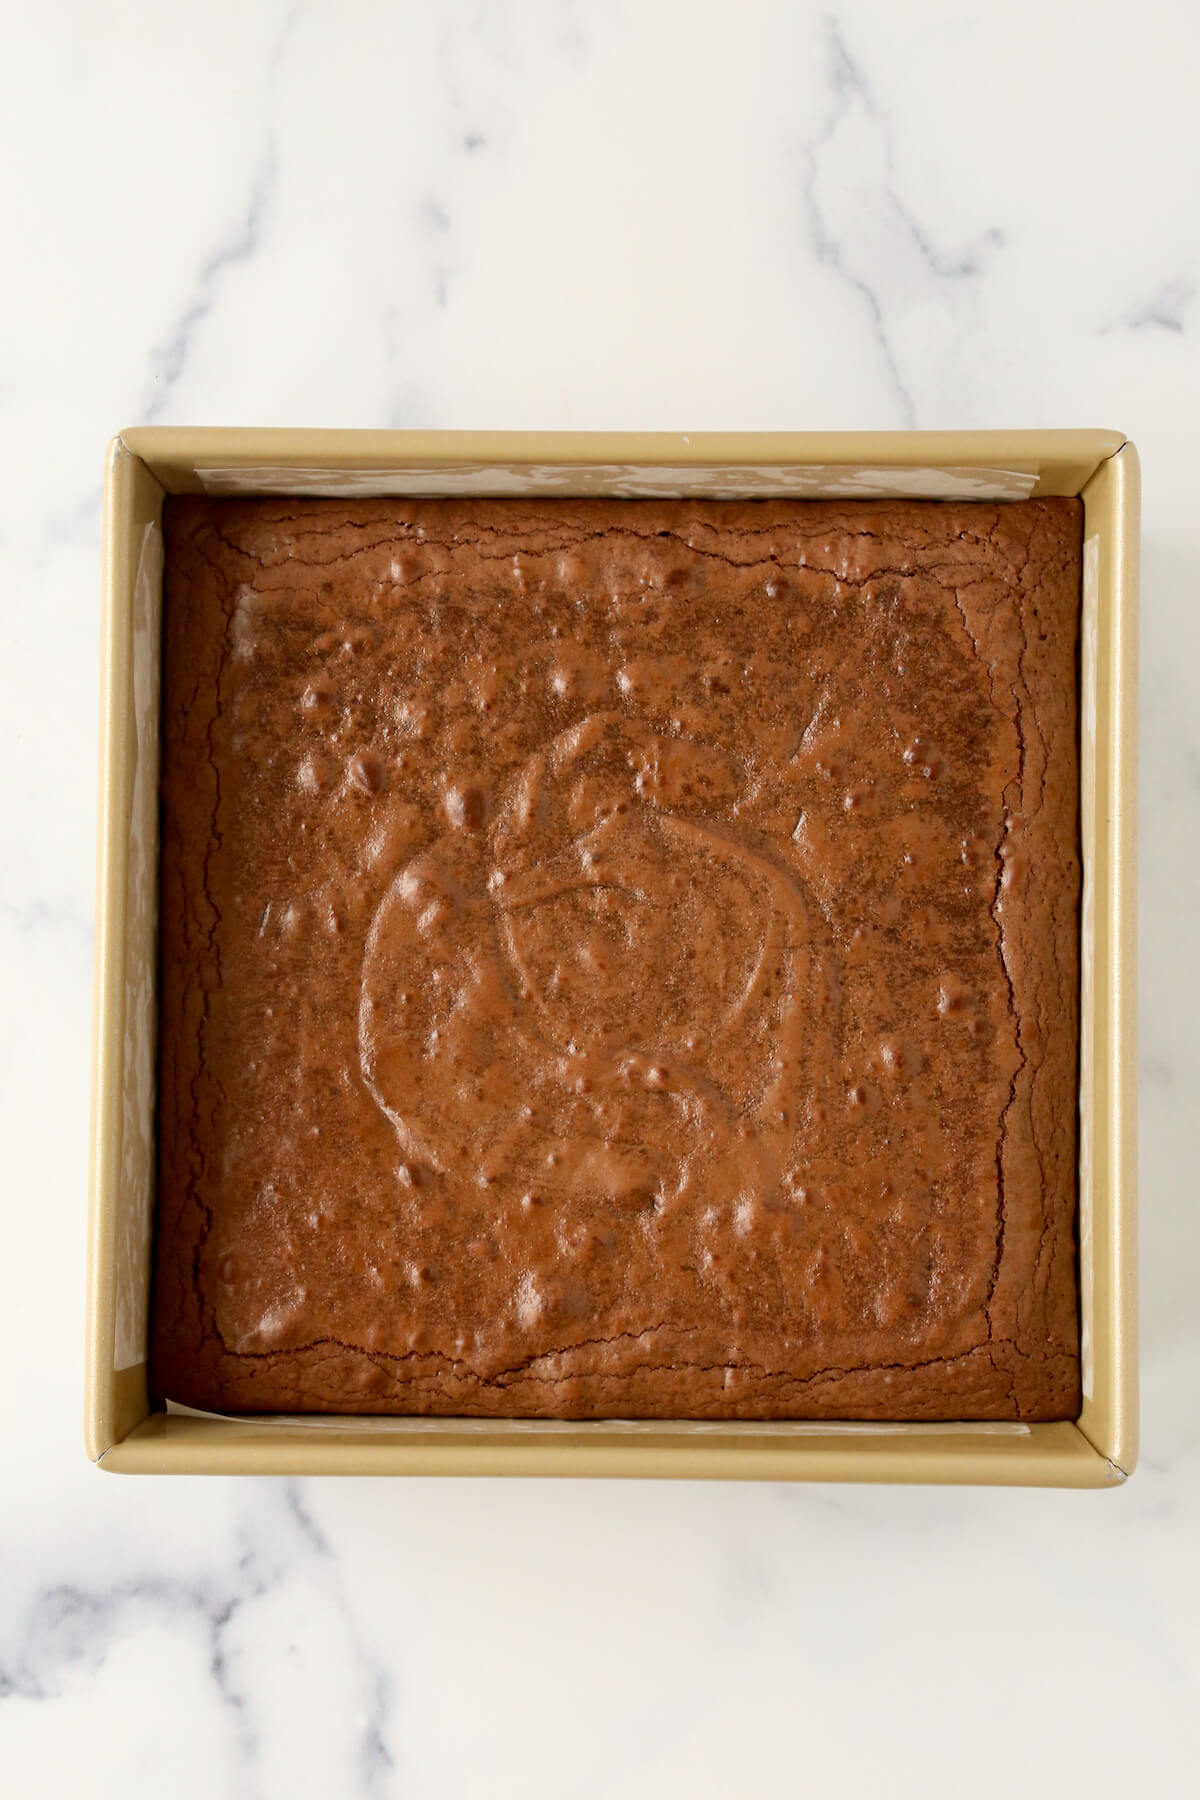 Chocolate brownie batter baked into a square gold pan.  